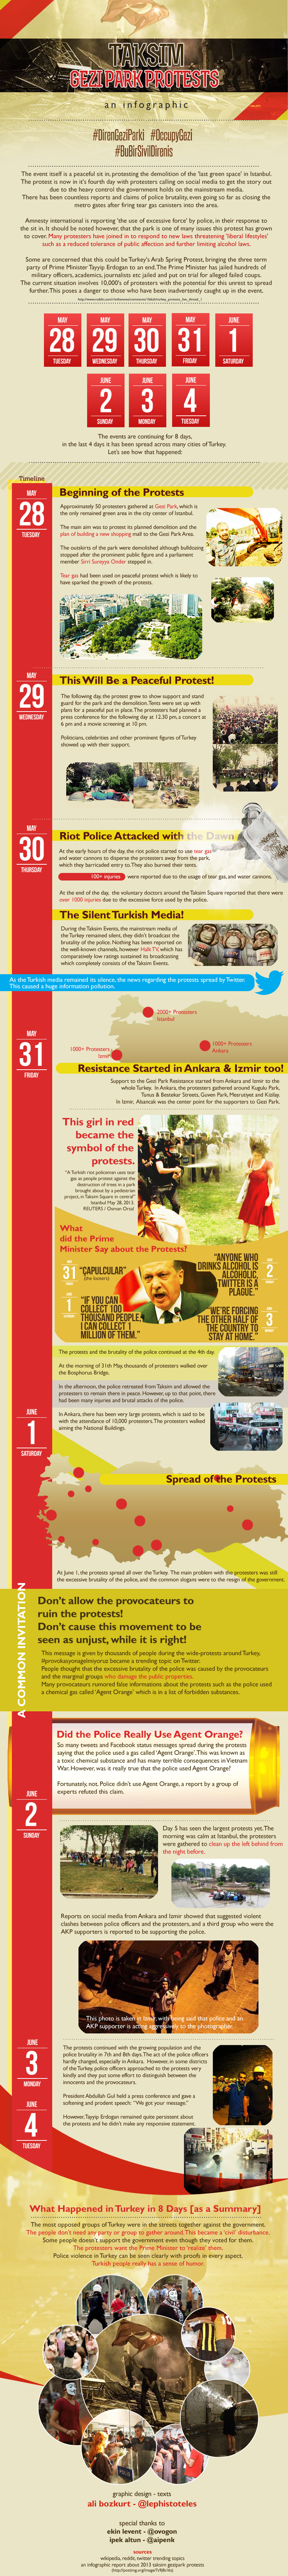 Gezi Park Protests Infographic - Edited